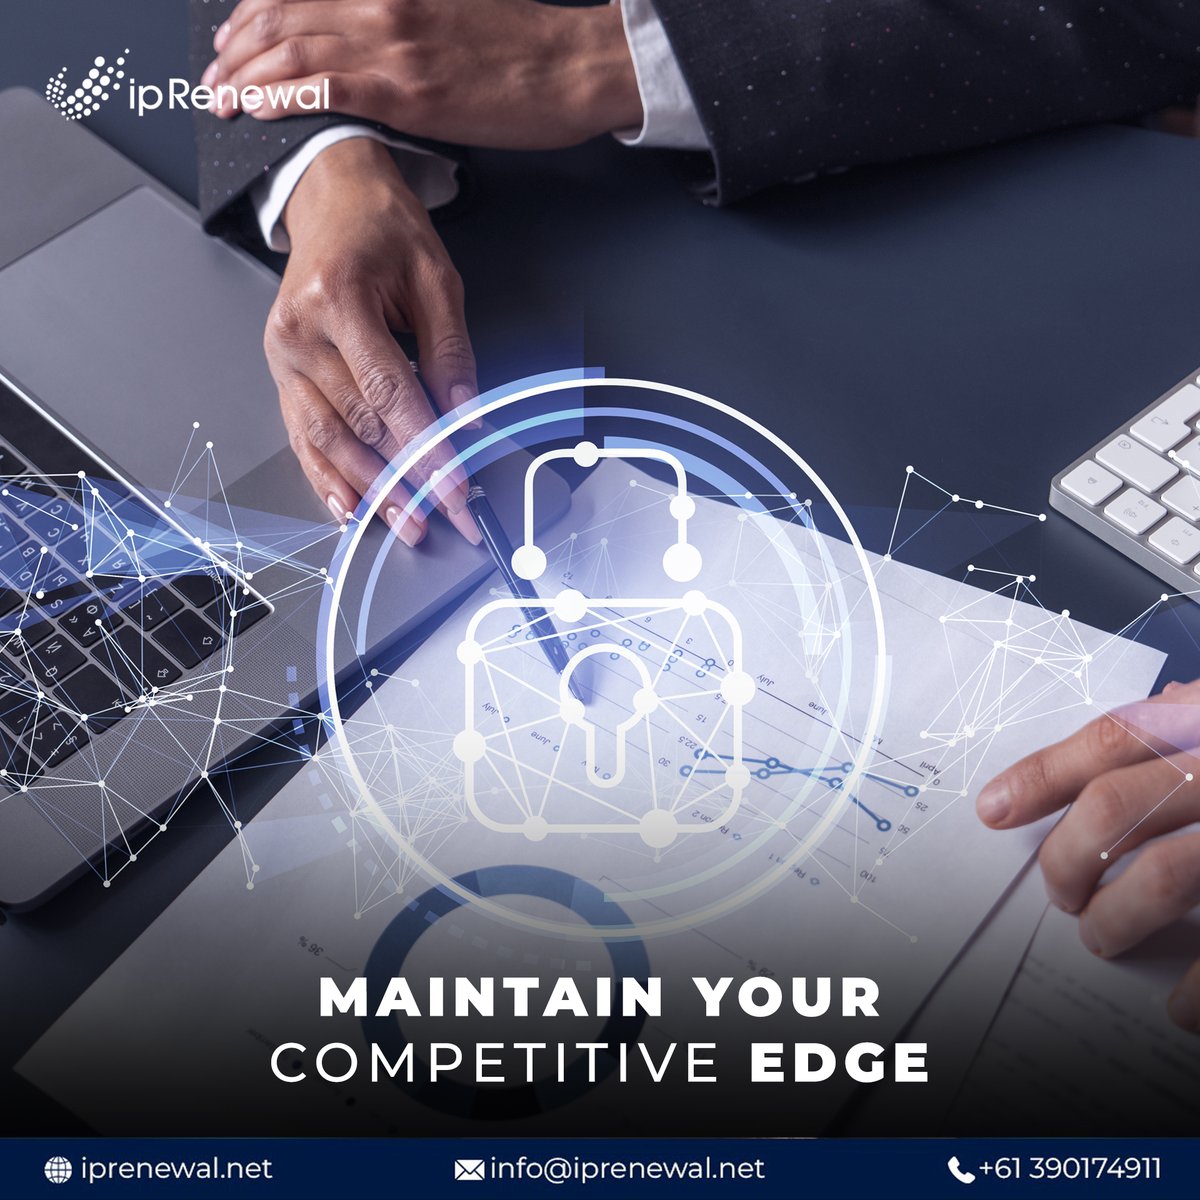 Maintain Your Competitive Edge: Renew Your Intellectual Property with Our Dedicated Service! ⚡🔒💼

#intellectualproperty #copyright #trademark #patent #ip #trademarks #patents #law #lawyer #entrepreneur #innovation #trademarkattorney